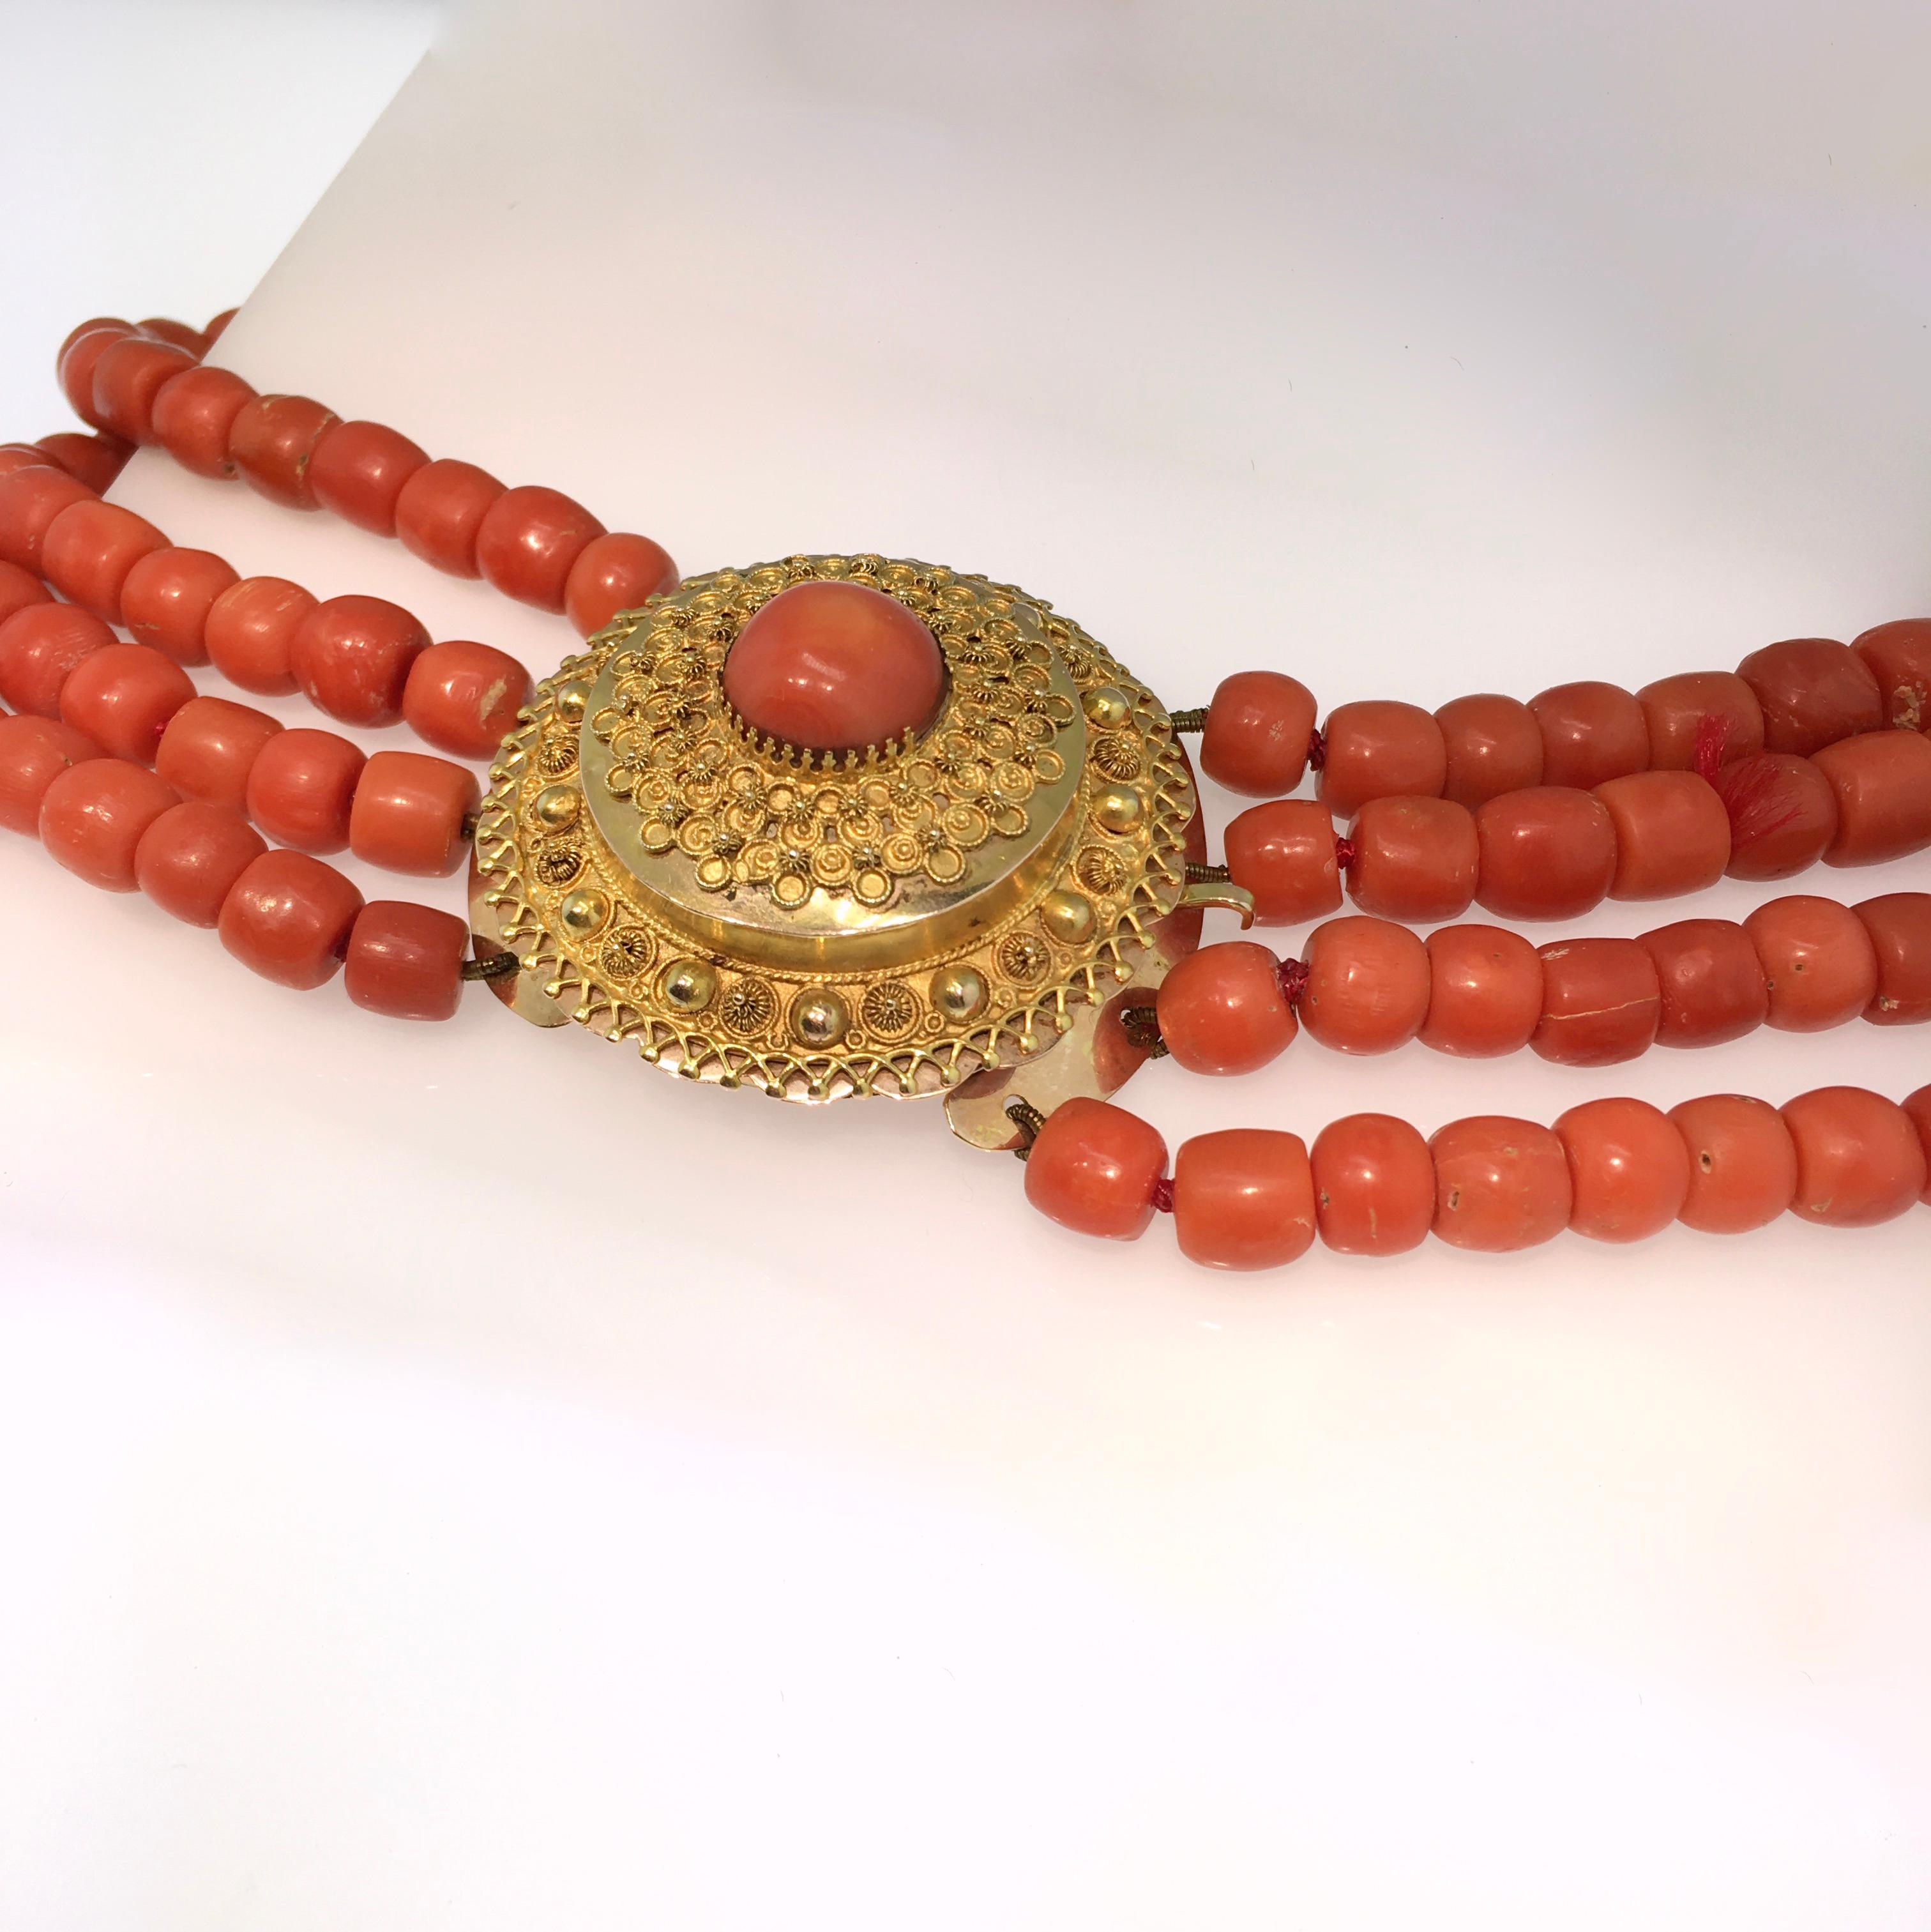 Bead Antique Coral, Necklace, Gold, 1880, Dutch Costume Jewelry